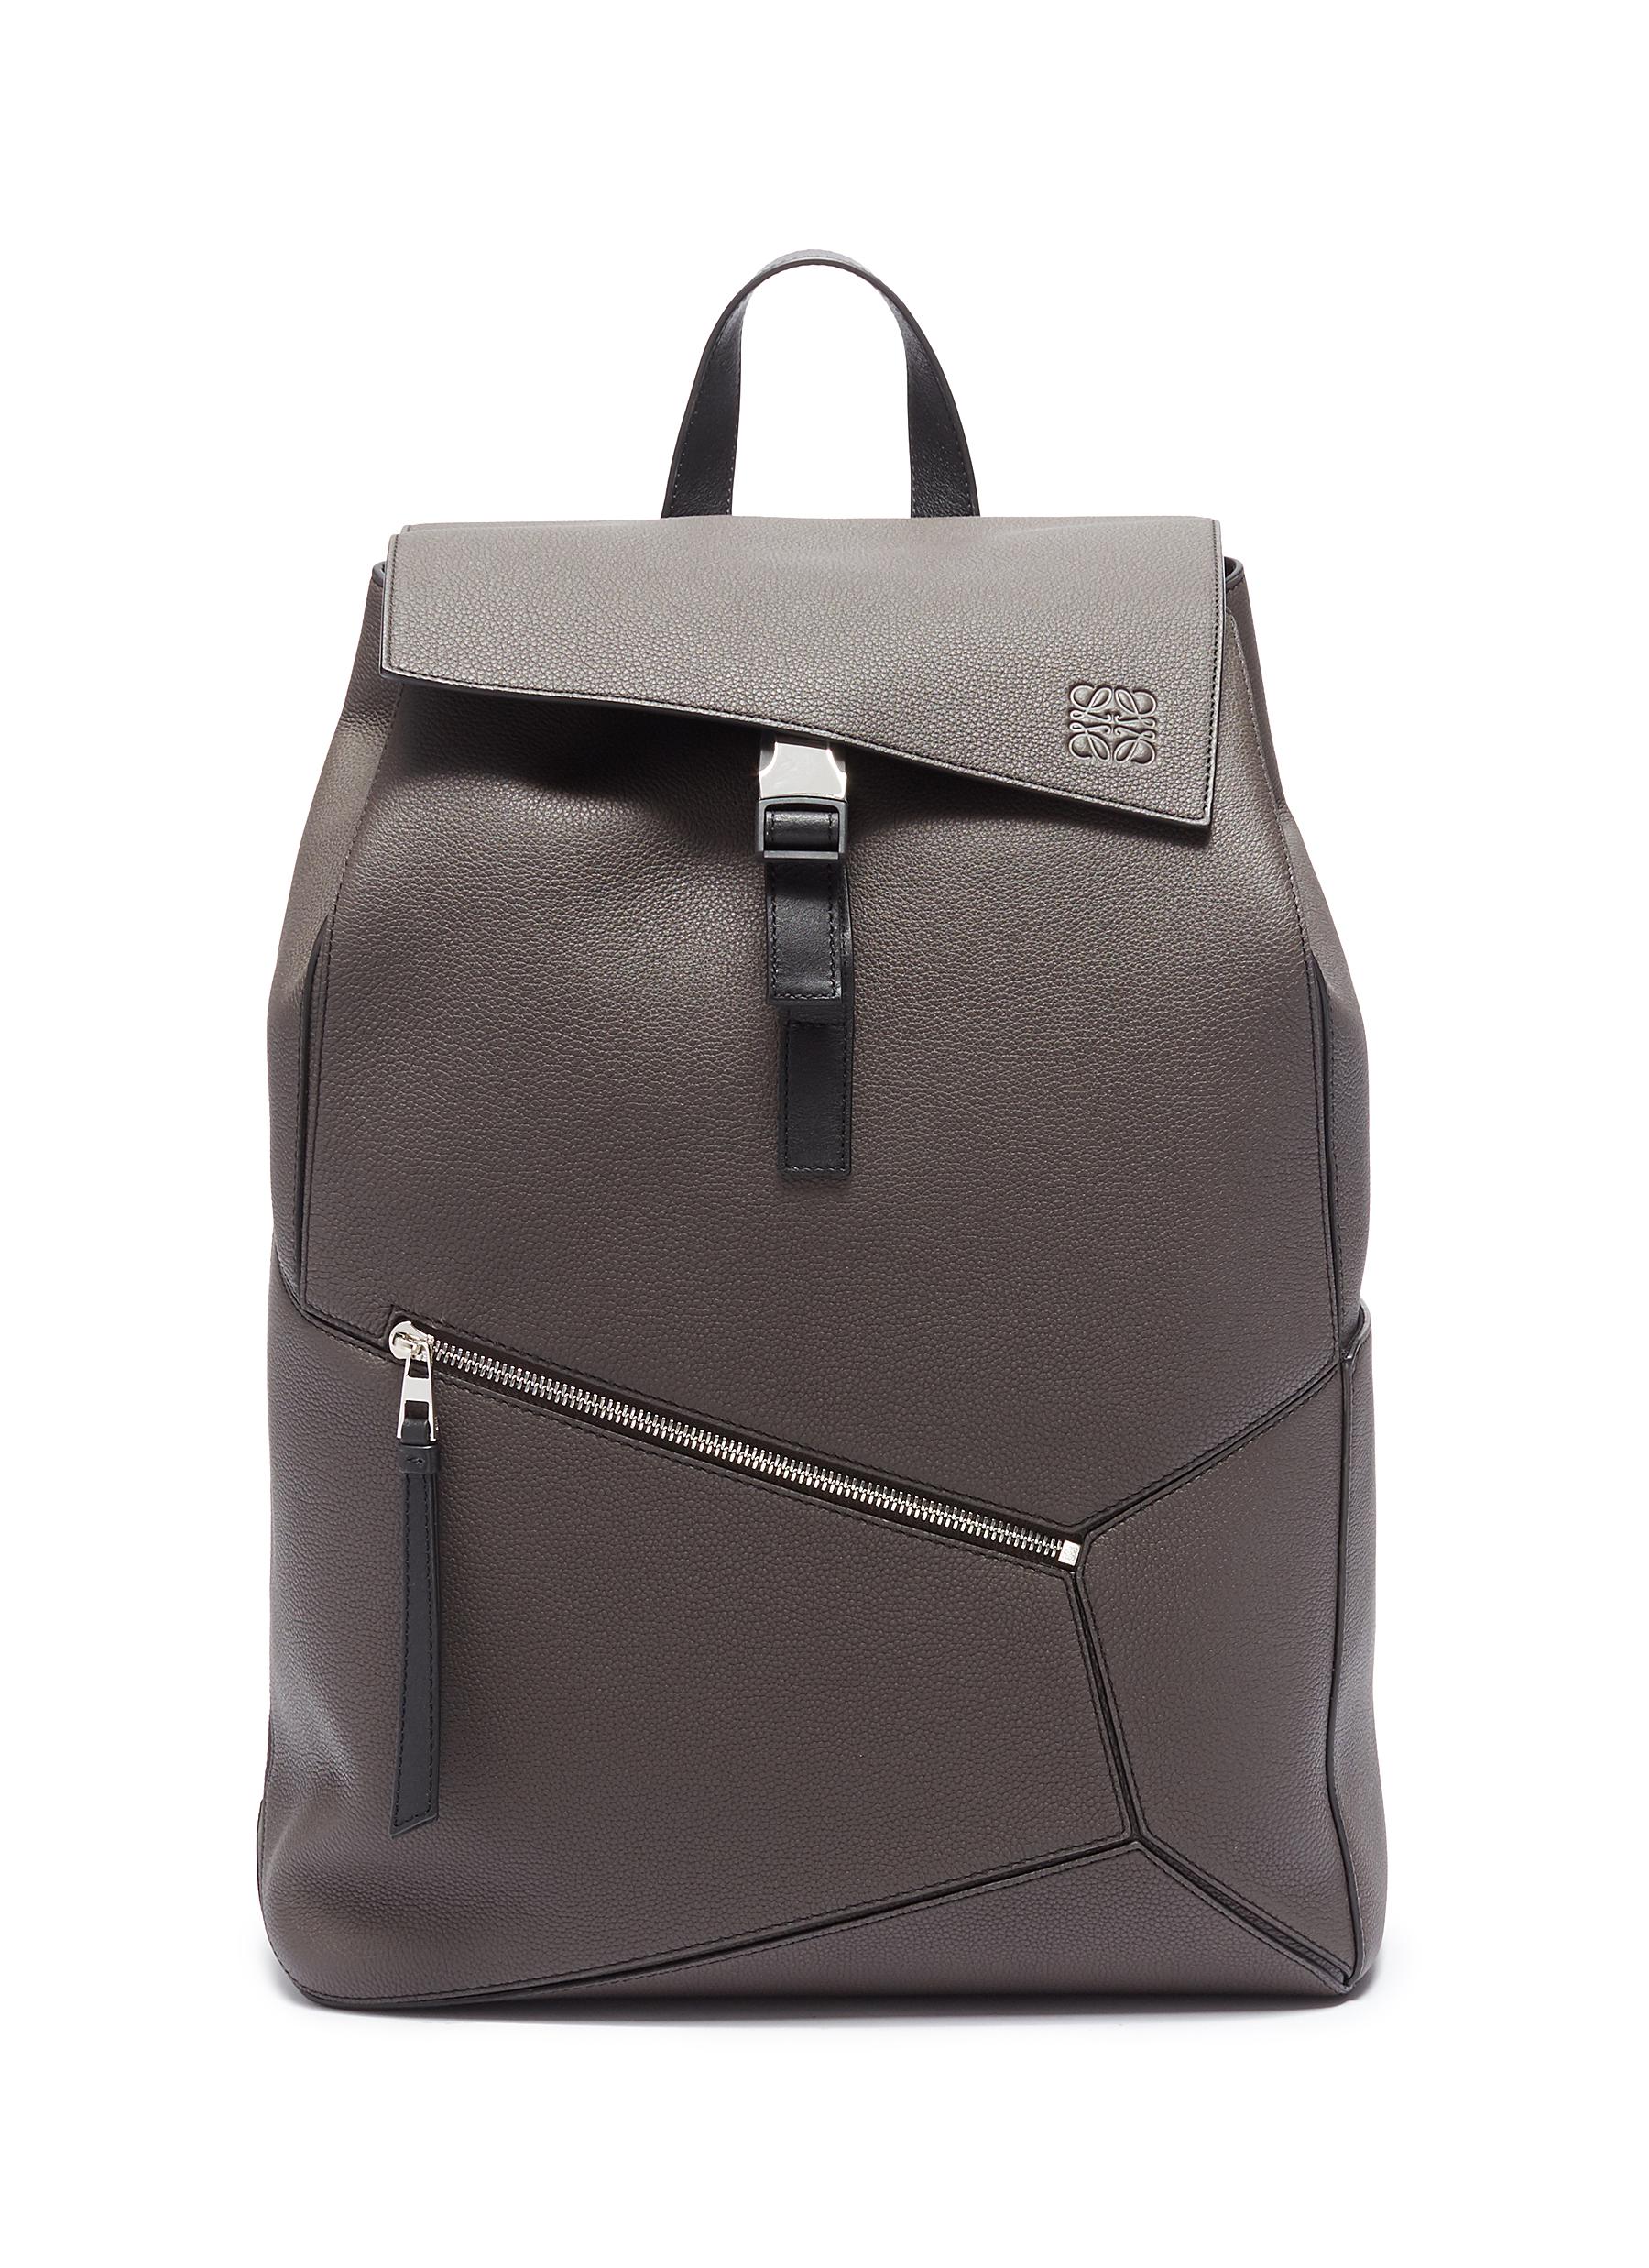 LOEWE | 'Puzzle' leather backpack | Men 